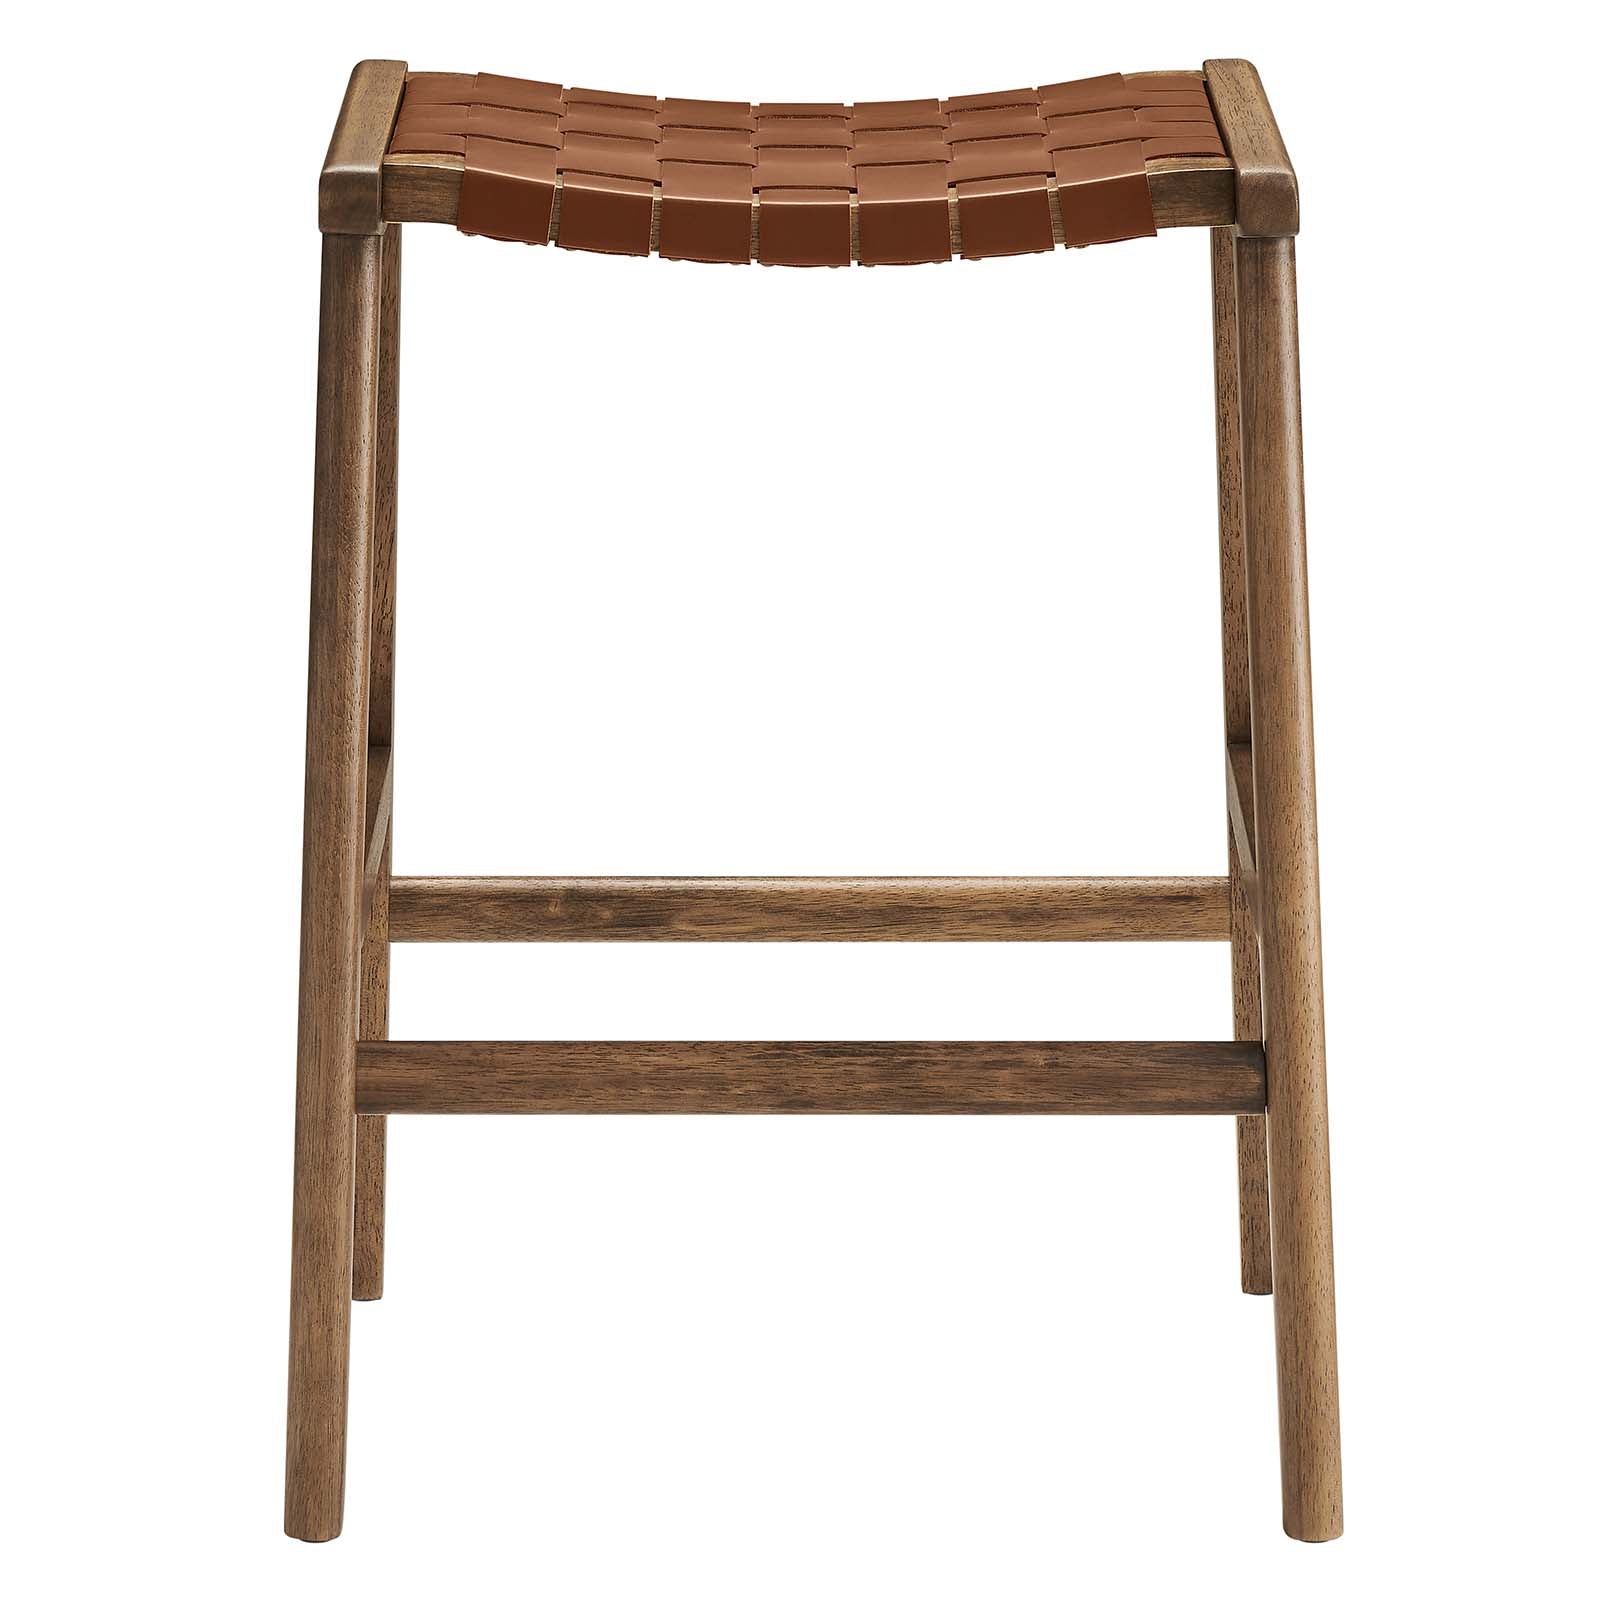 Saorise Woven Leather Wood Counter Stool - Set of 2